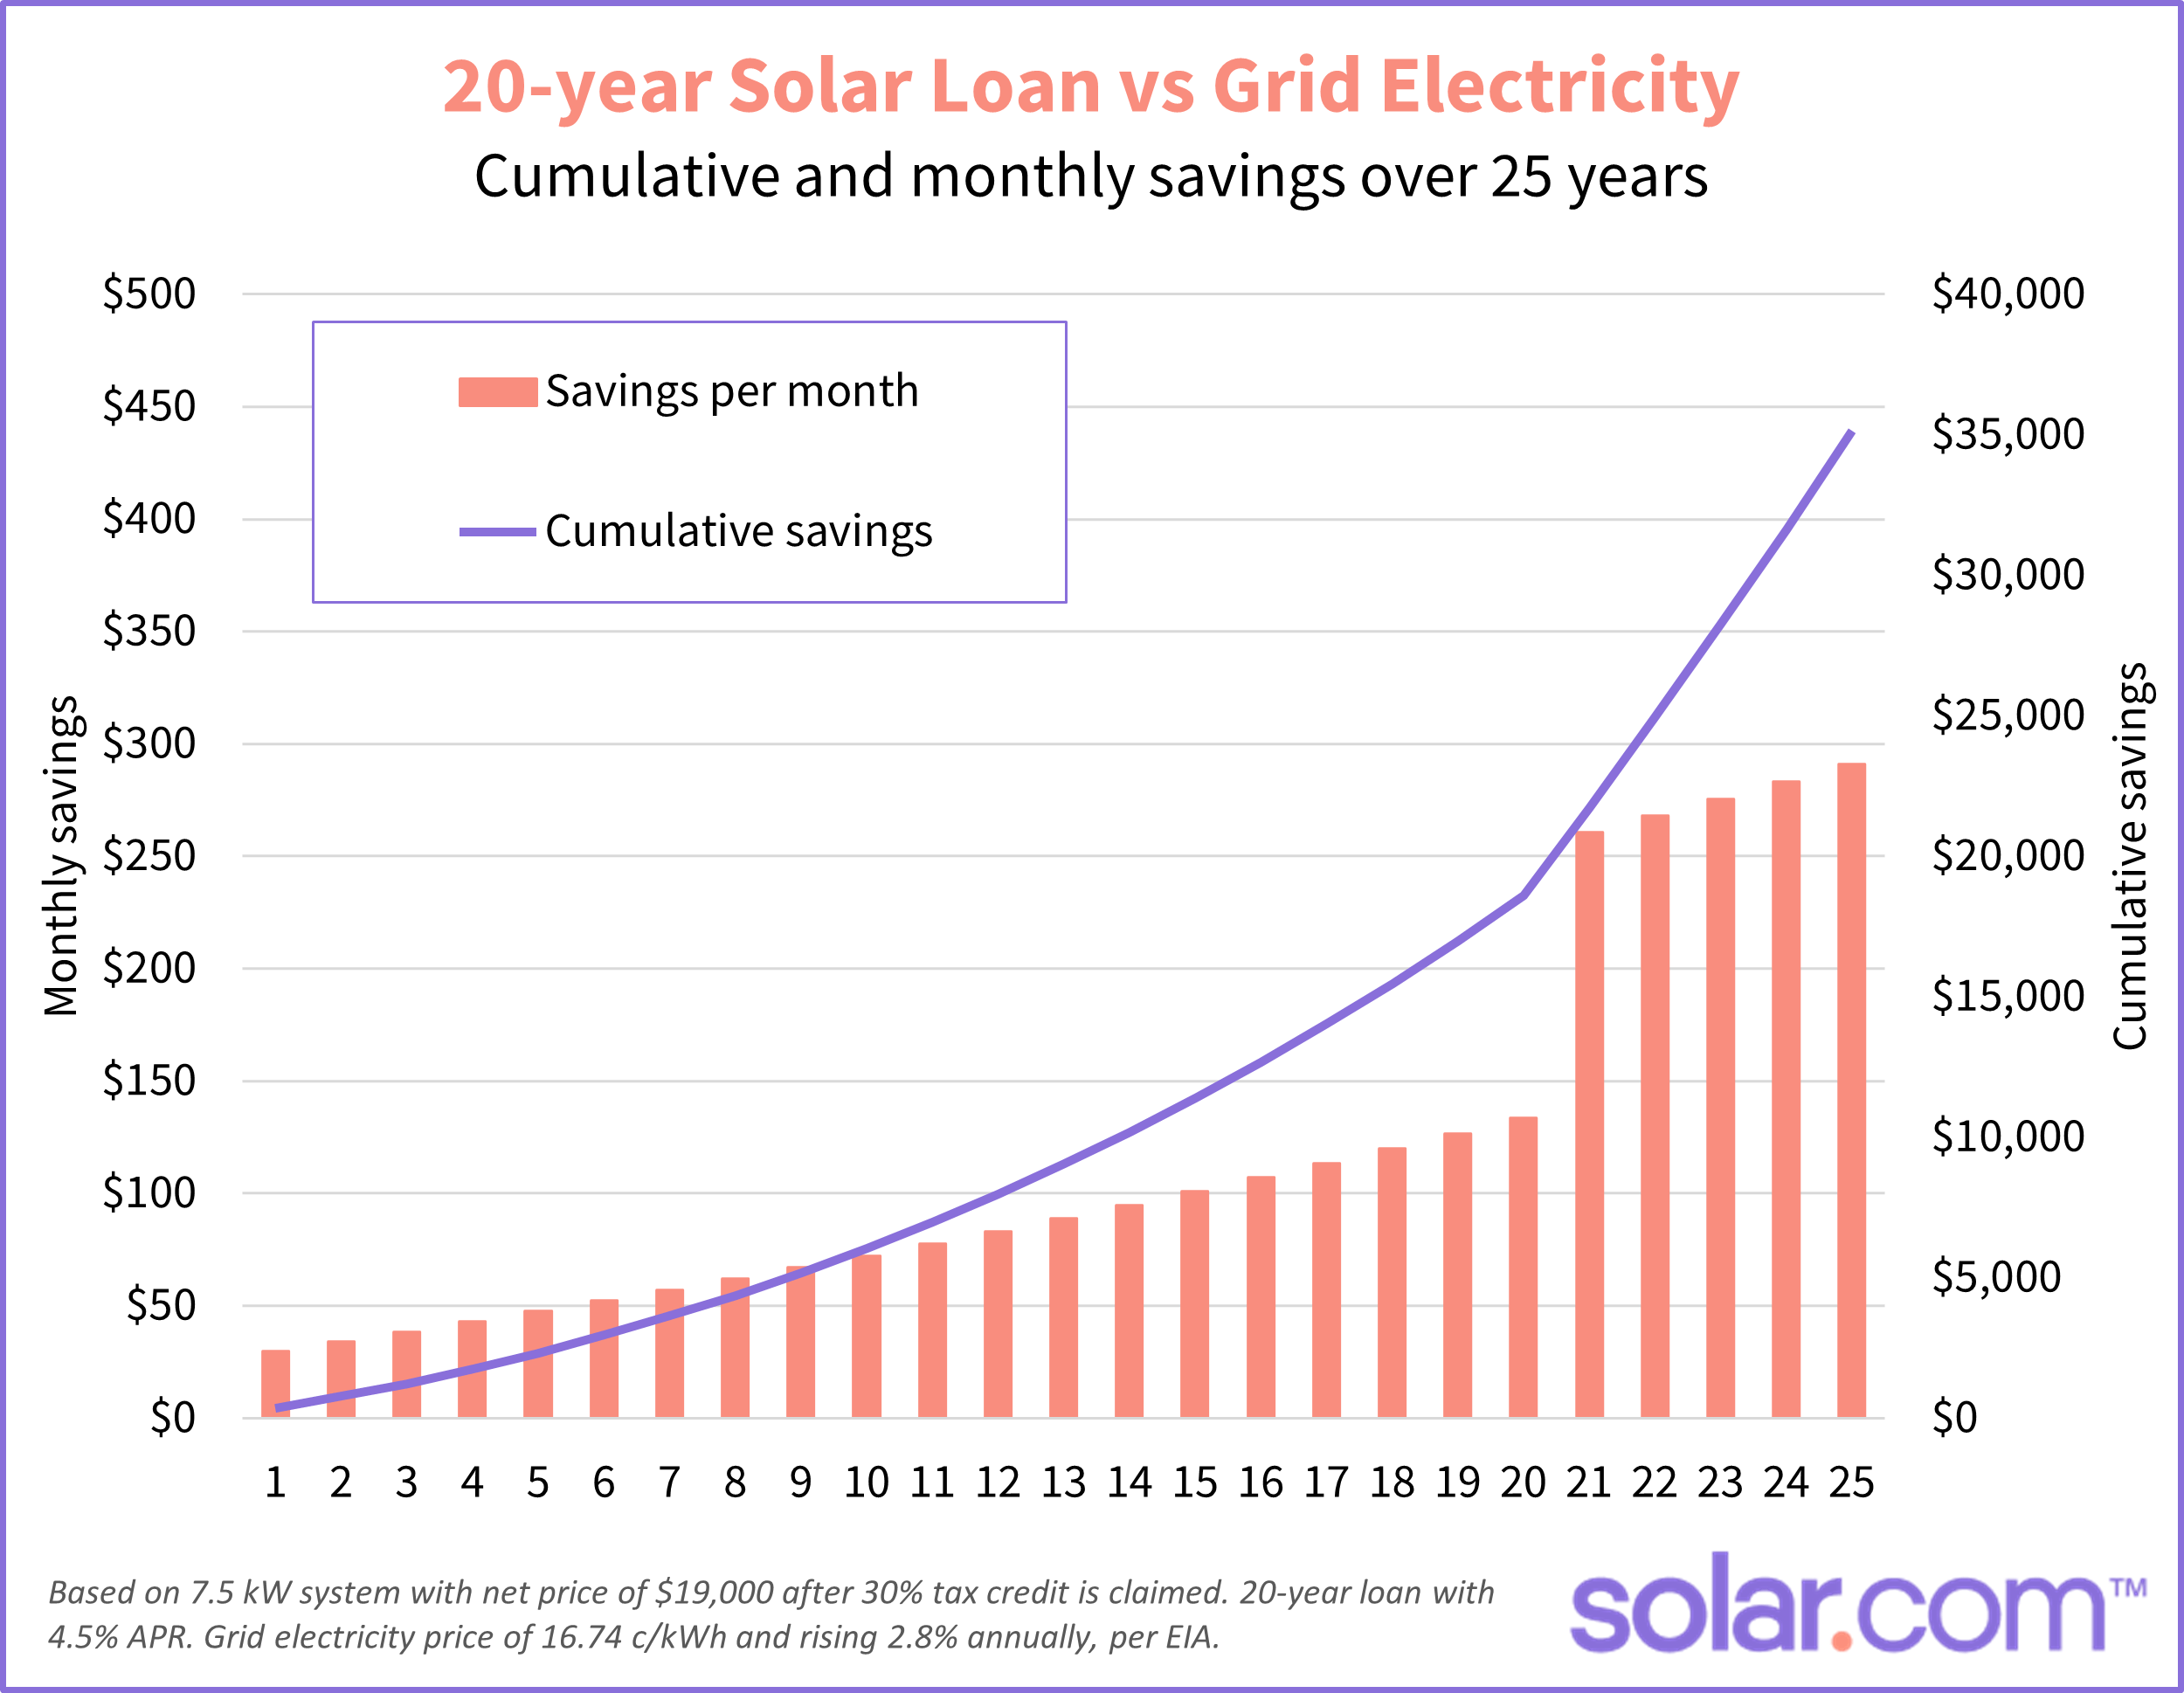 A graph from solar.com that illustrates cumulative and monthly savings from rooftop solar compared to grid electricity over 25 years